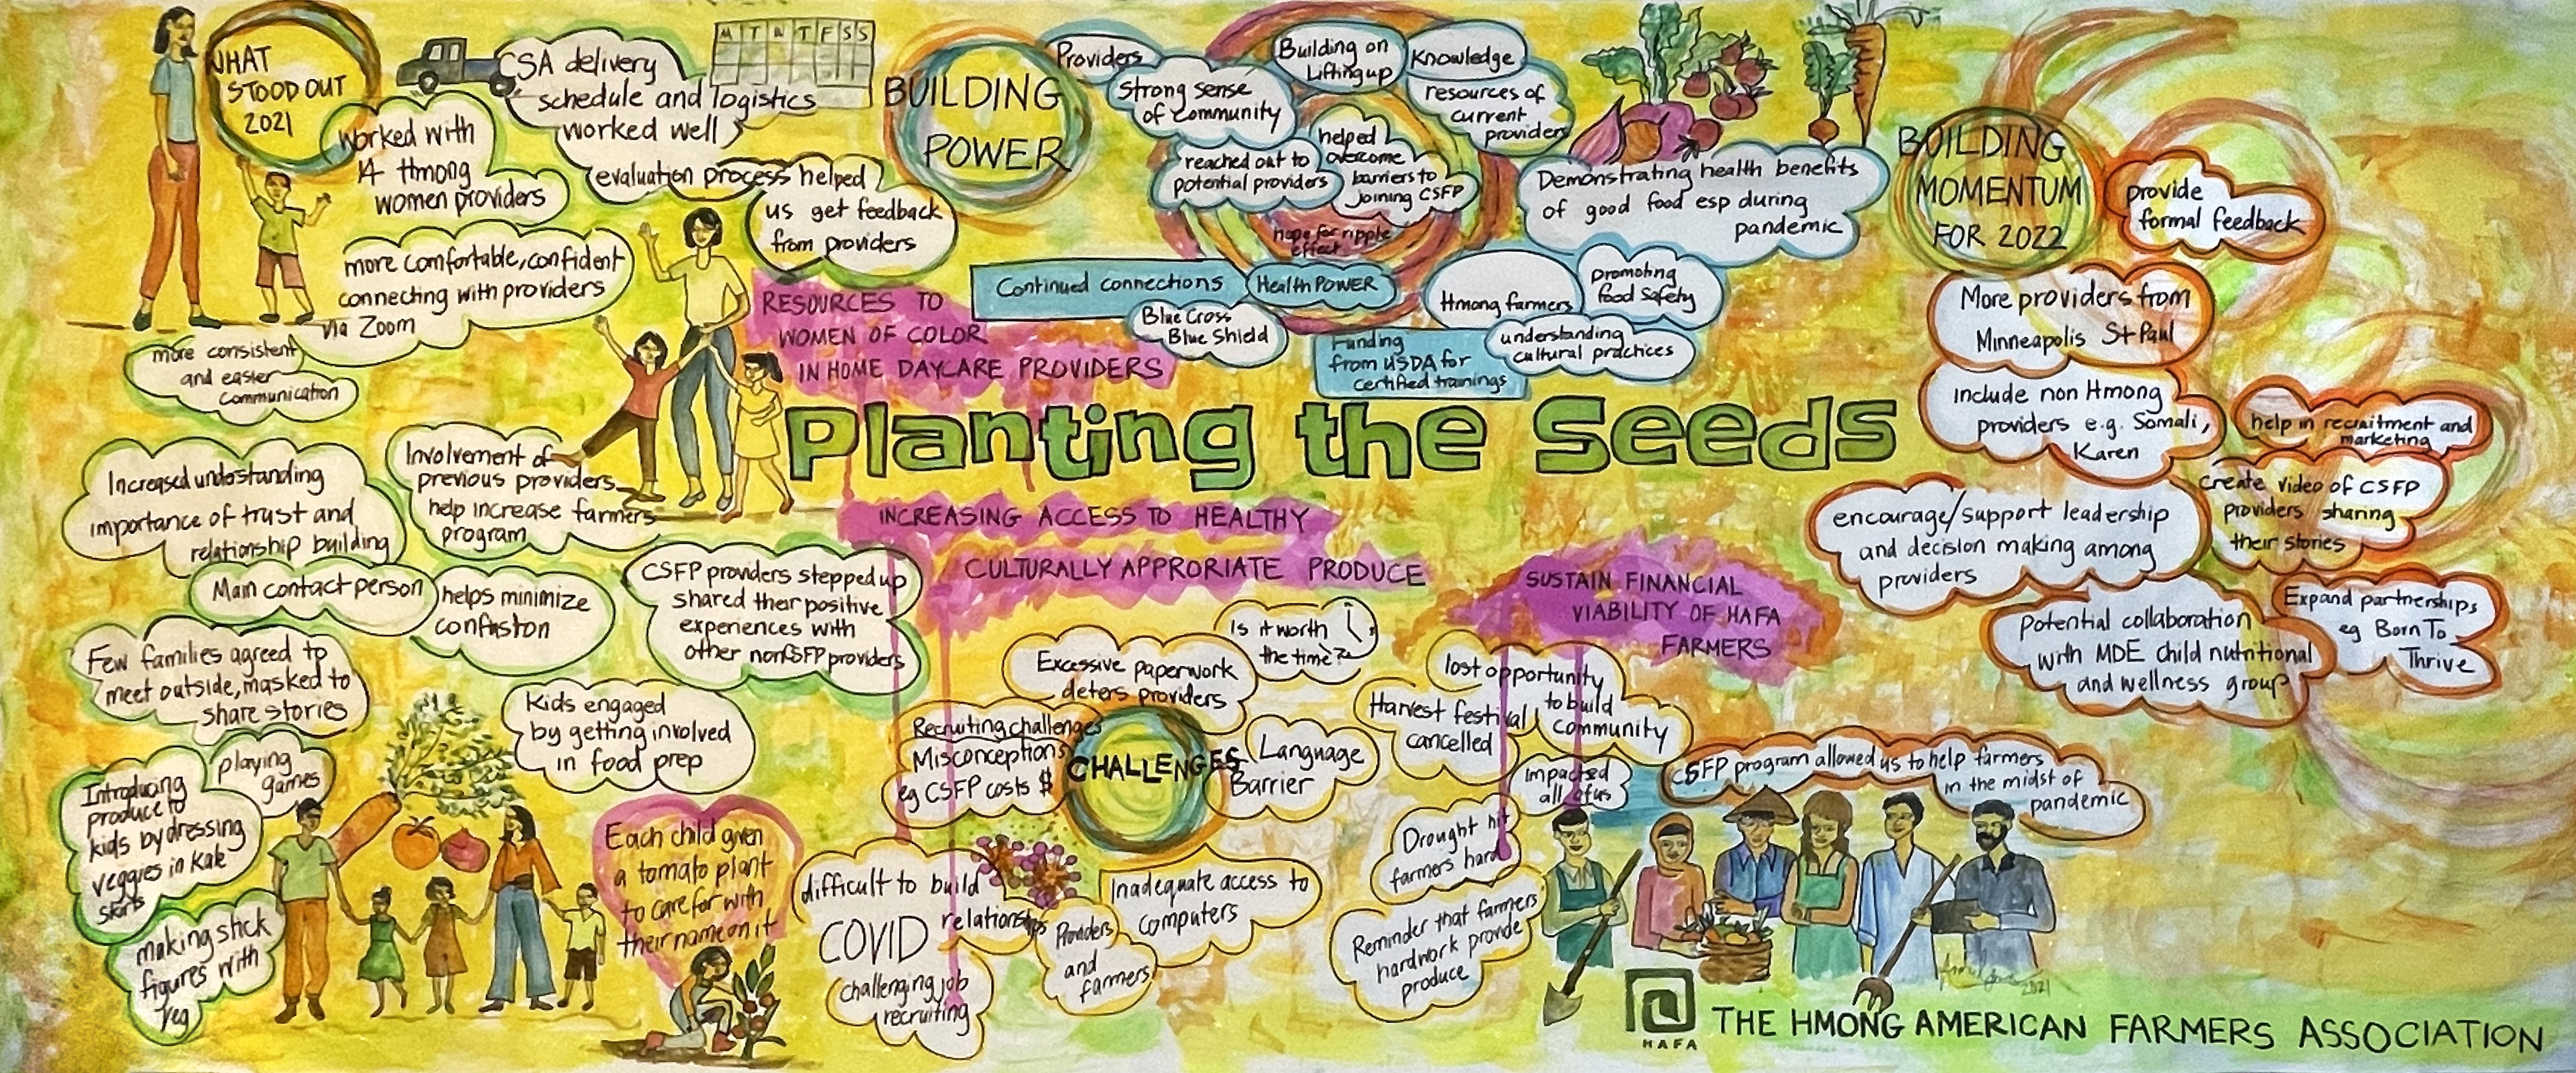 Farm to early care journey map